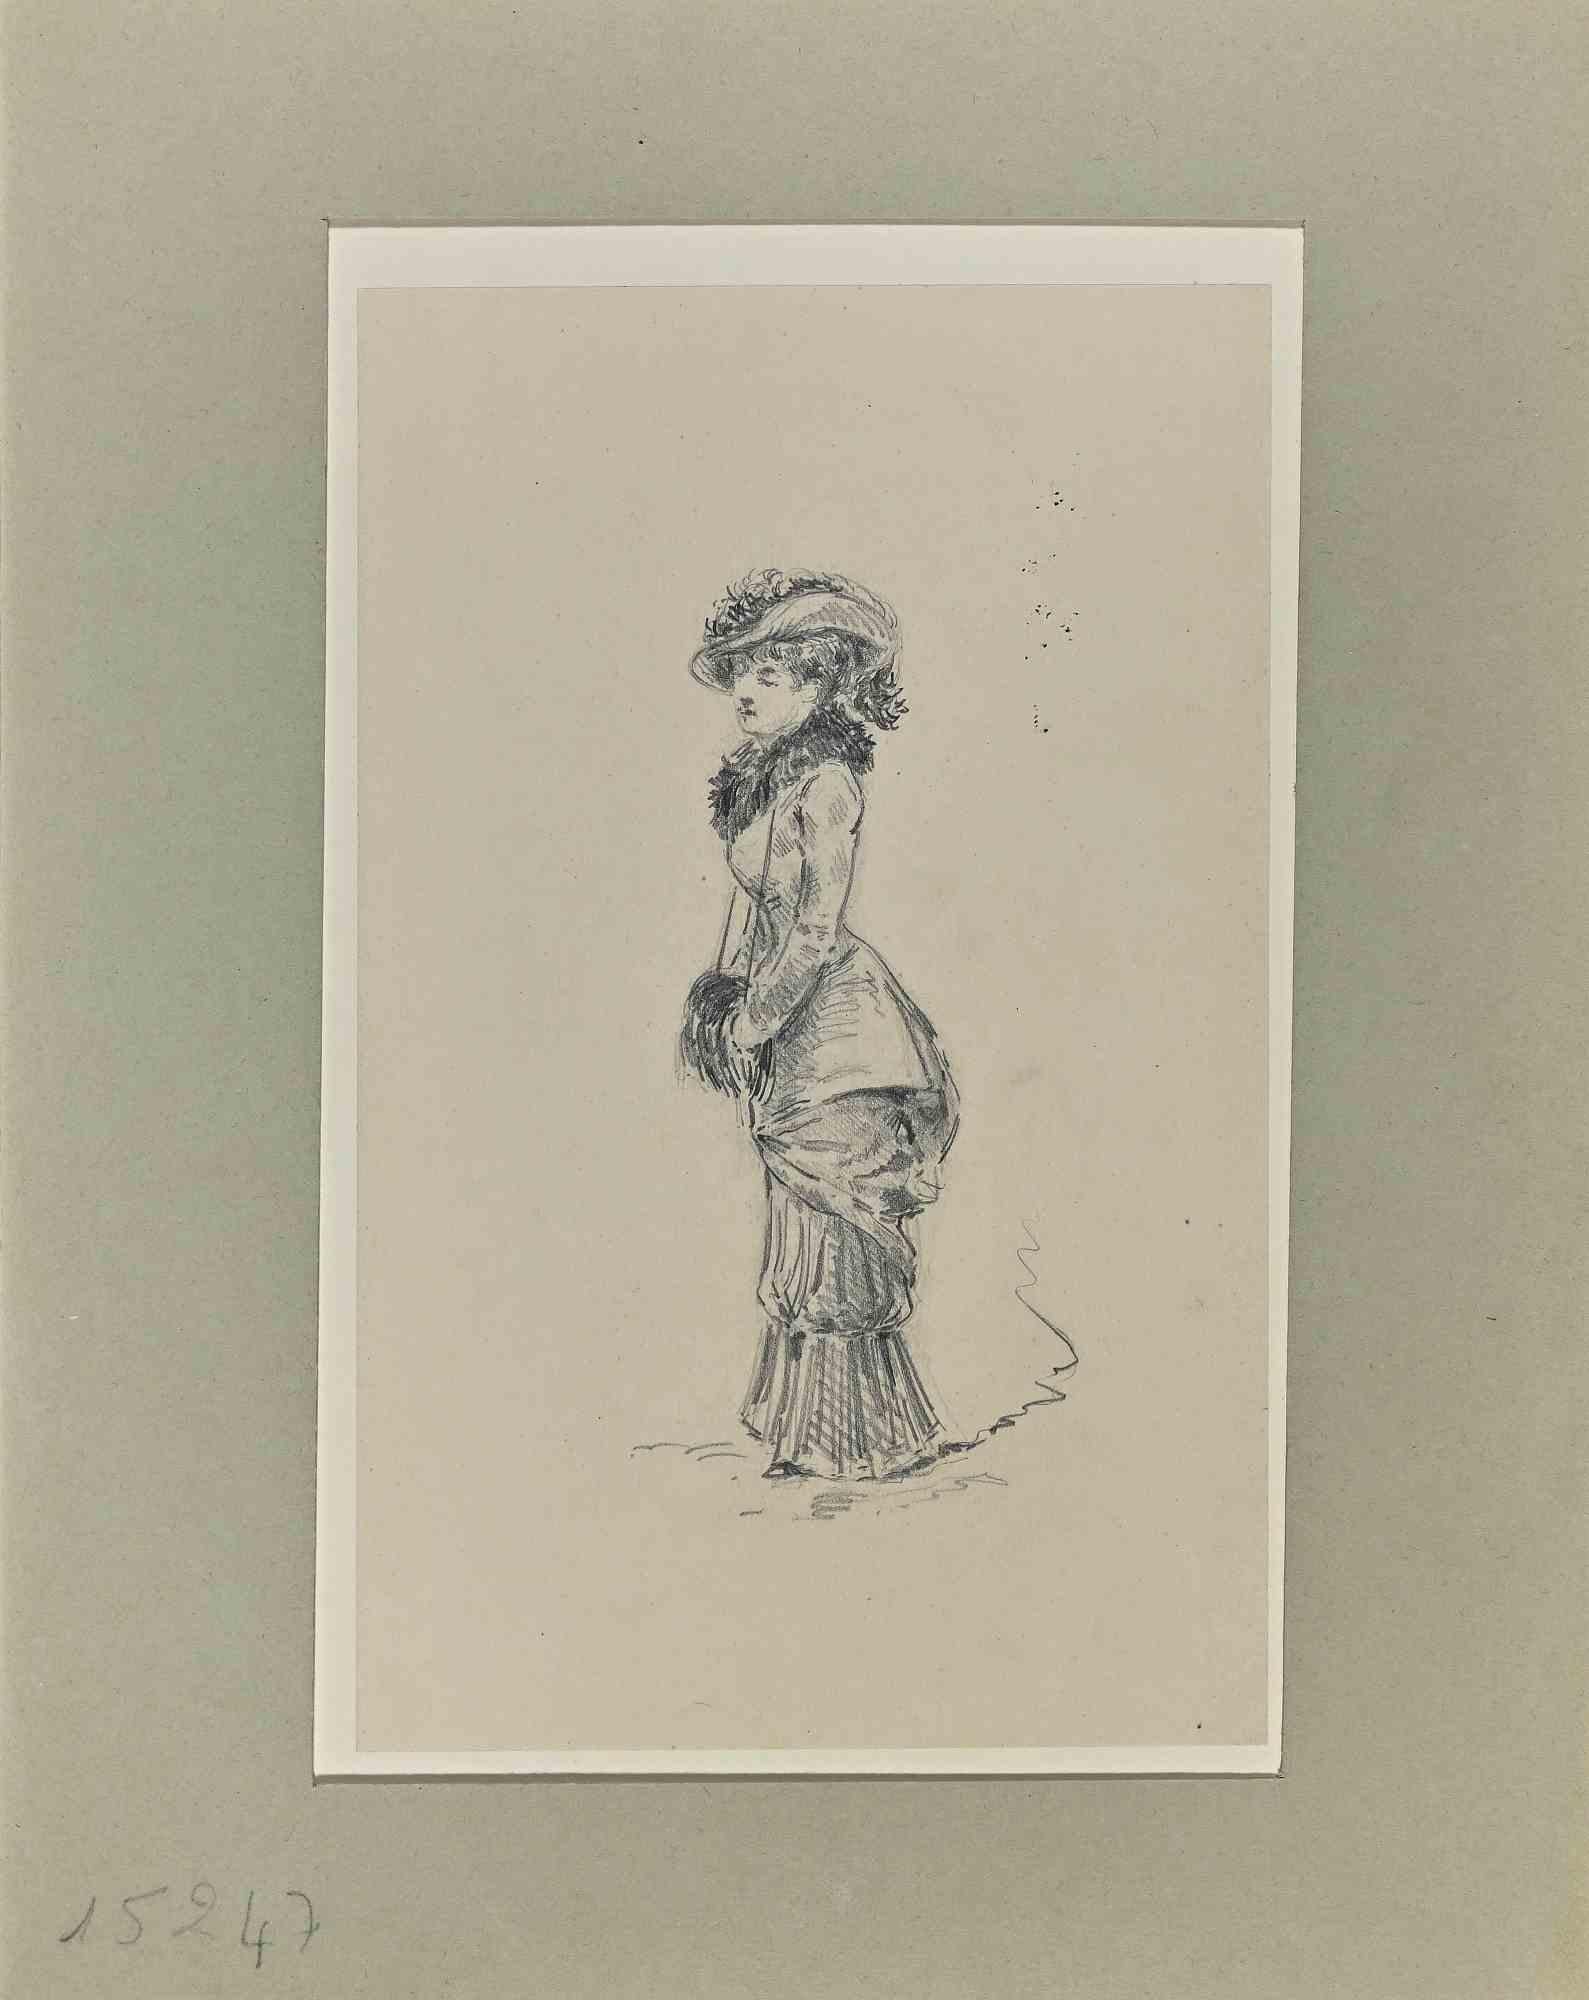 Woman - Original Drawing on Paper by H. Somm - Late 19th Century - Art by Henry Somm